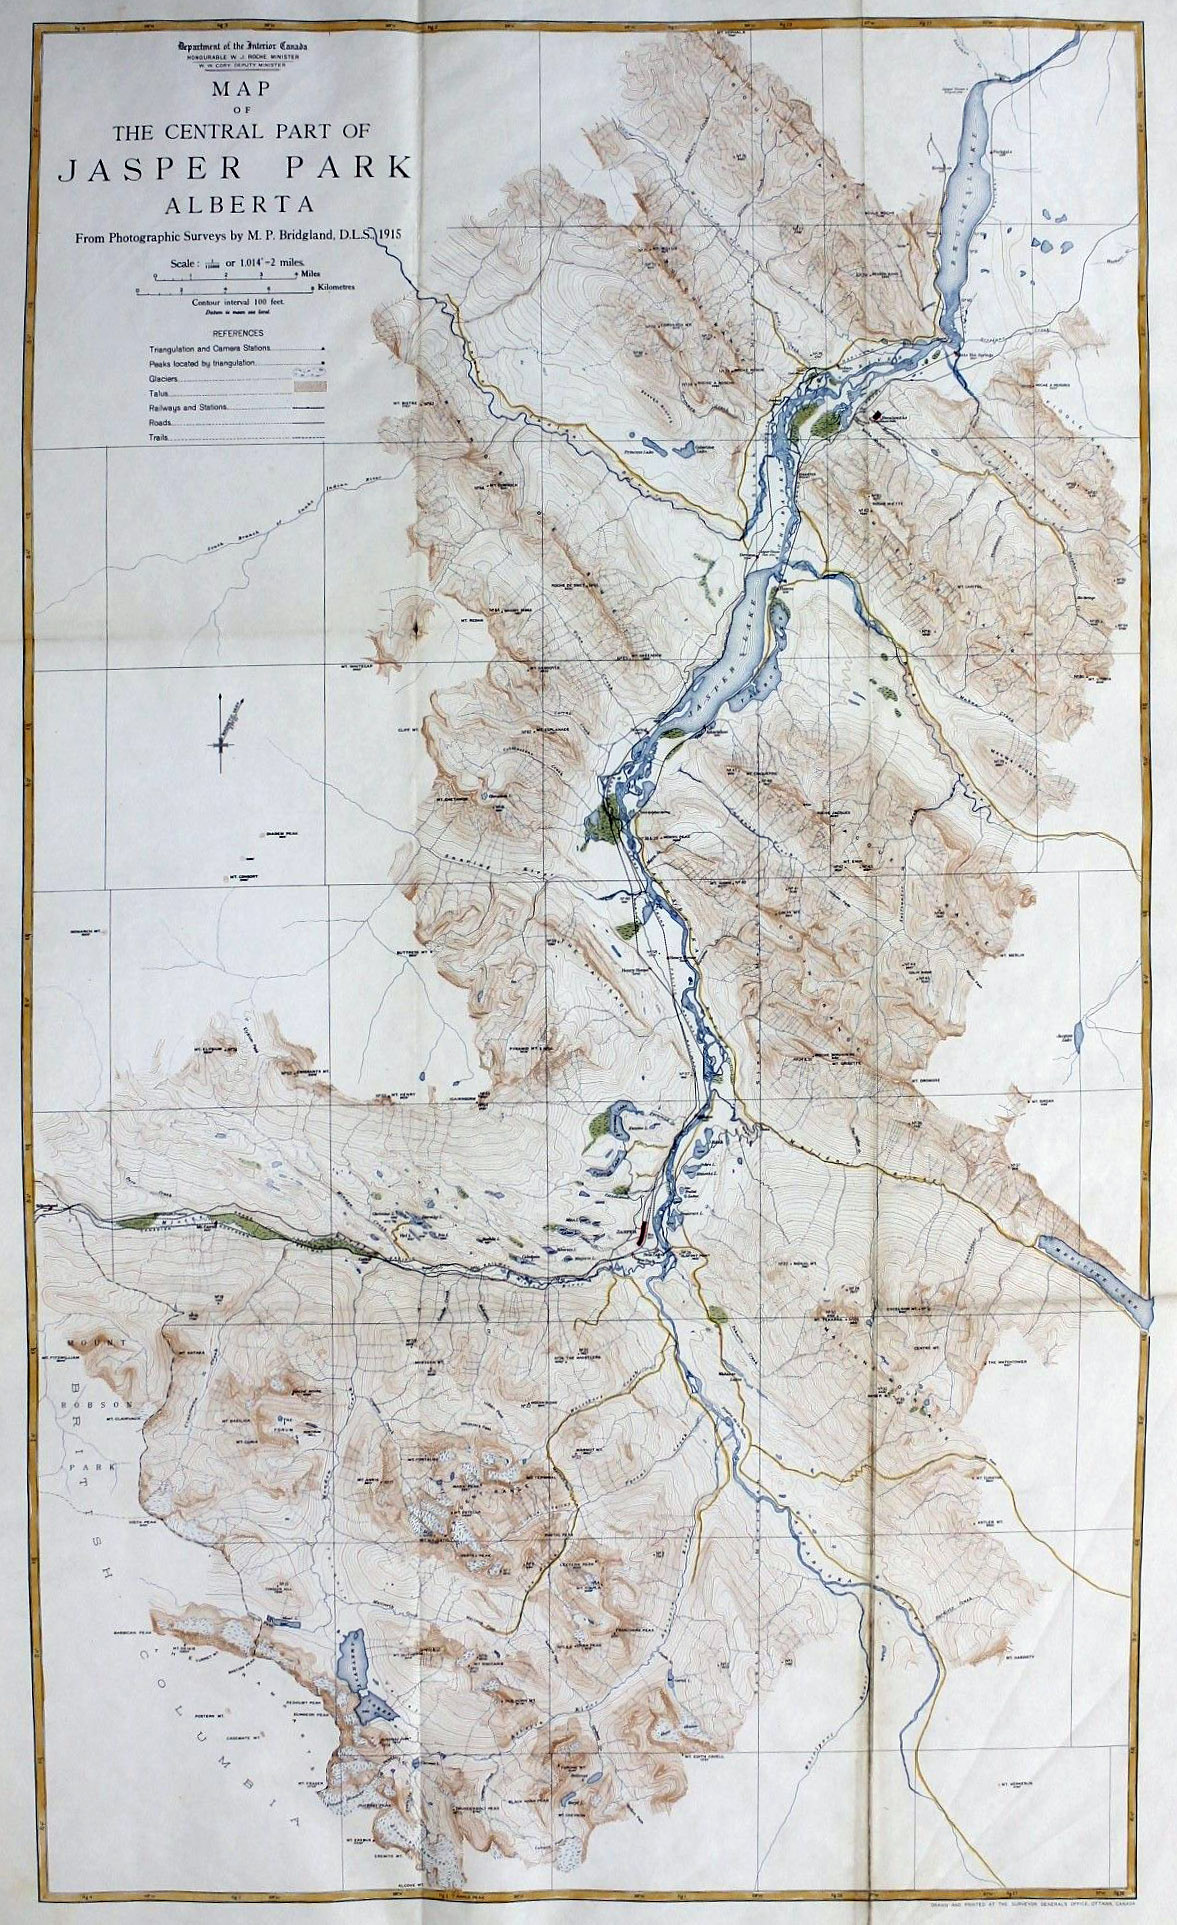 Map of Central Part of Jasper Park, Alberta
Department of the Interior Canada
Based on photographic surveys by M. P. Bridgland, D.L S., in 1915